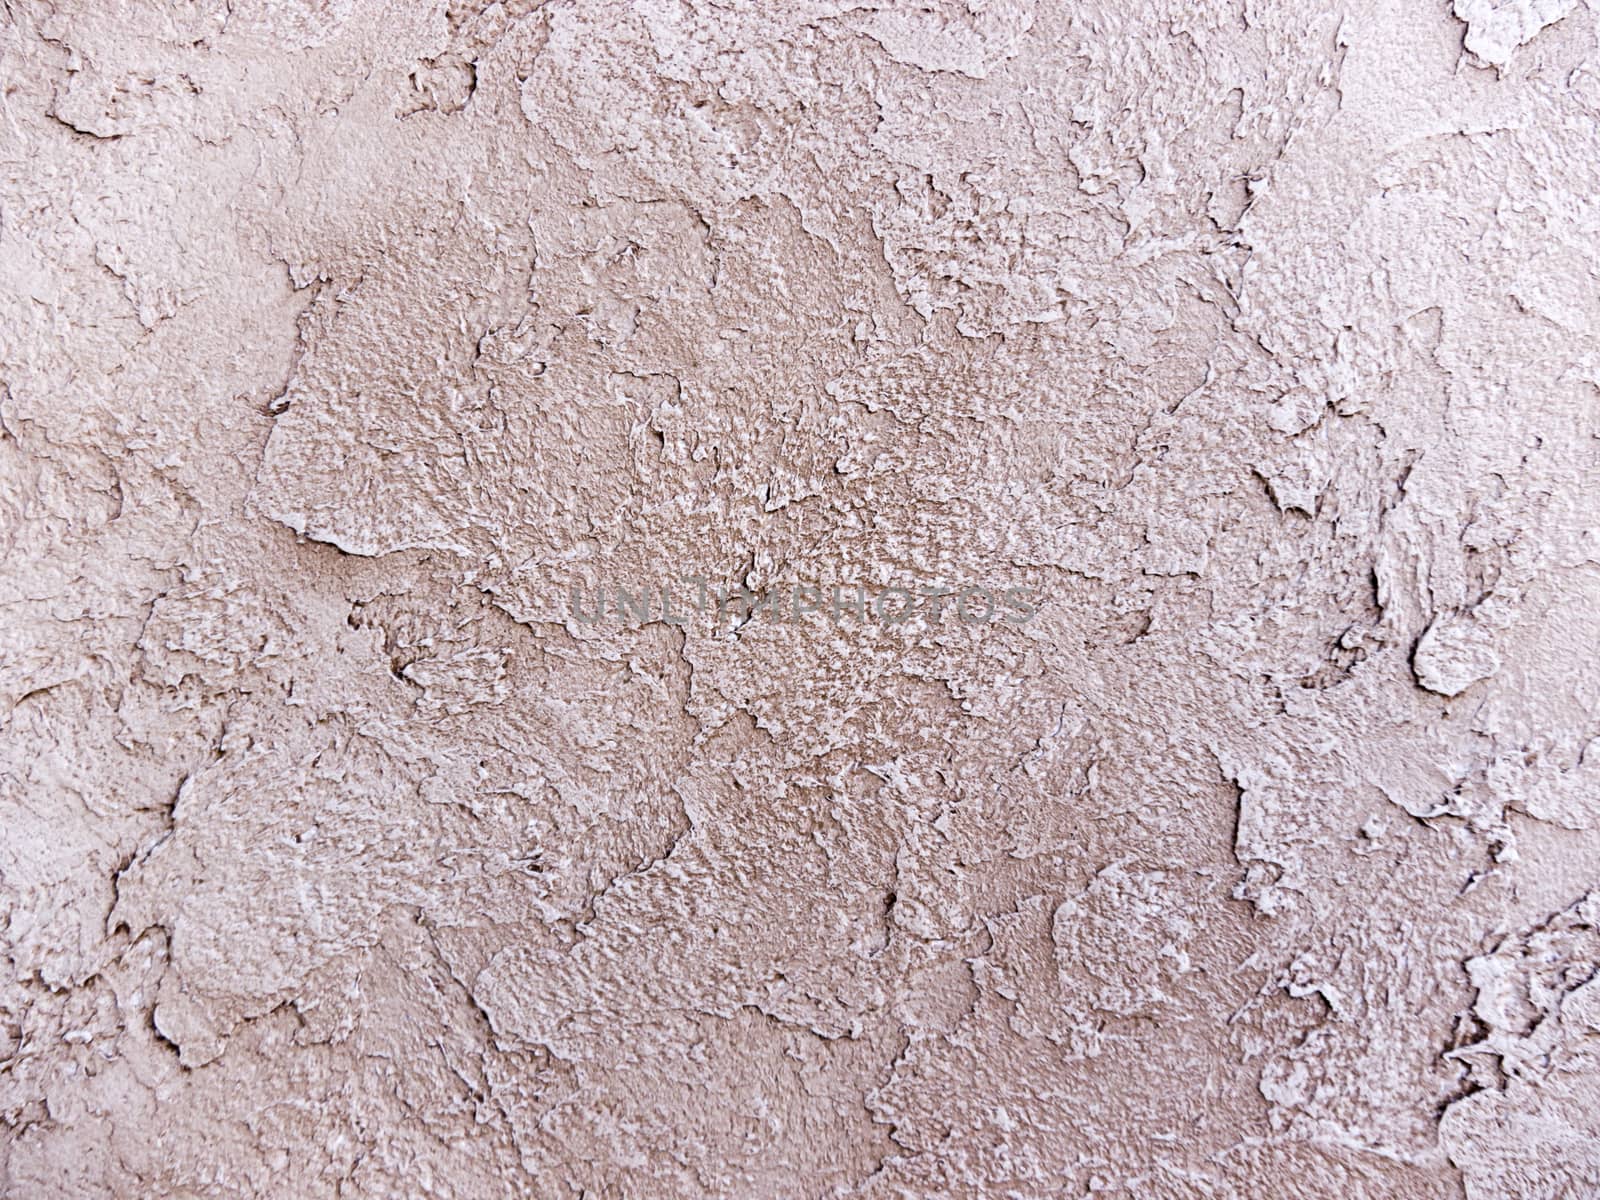 Plastered Concrete Wall Background Texture Detail by fascinadora